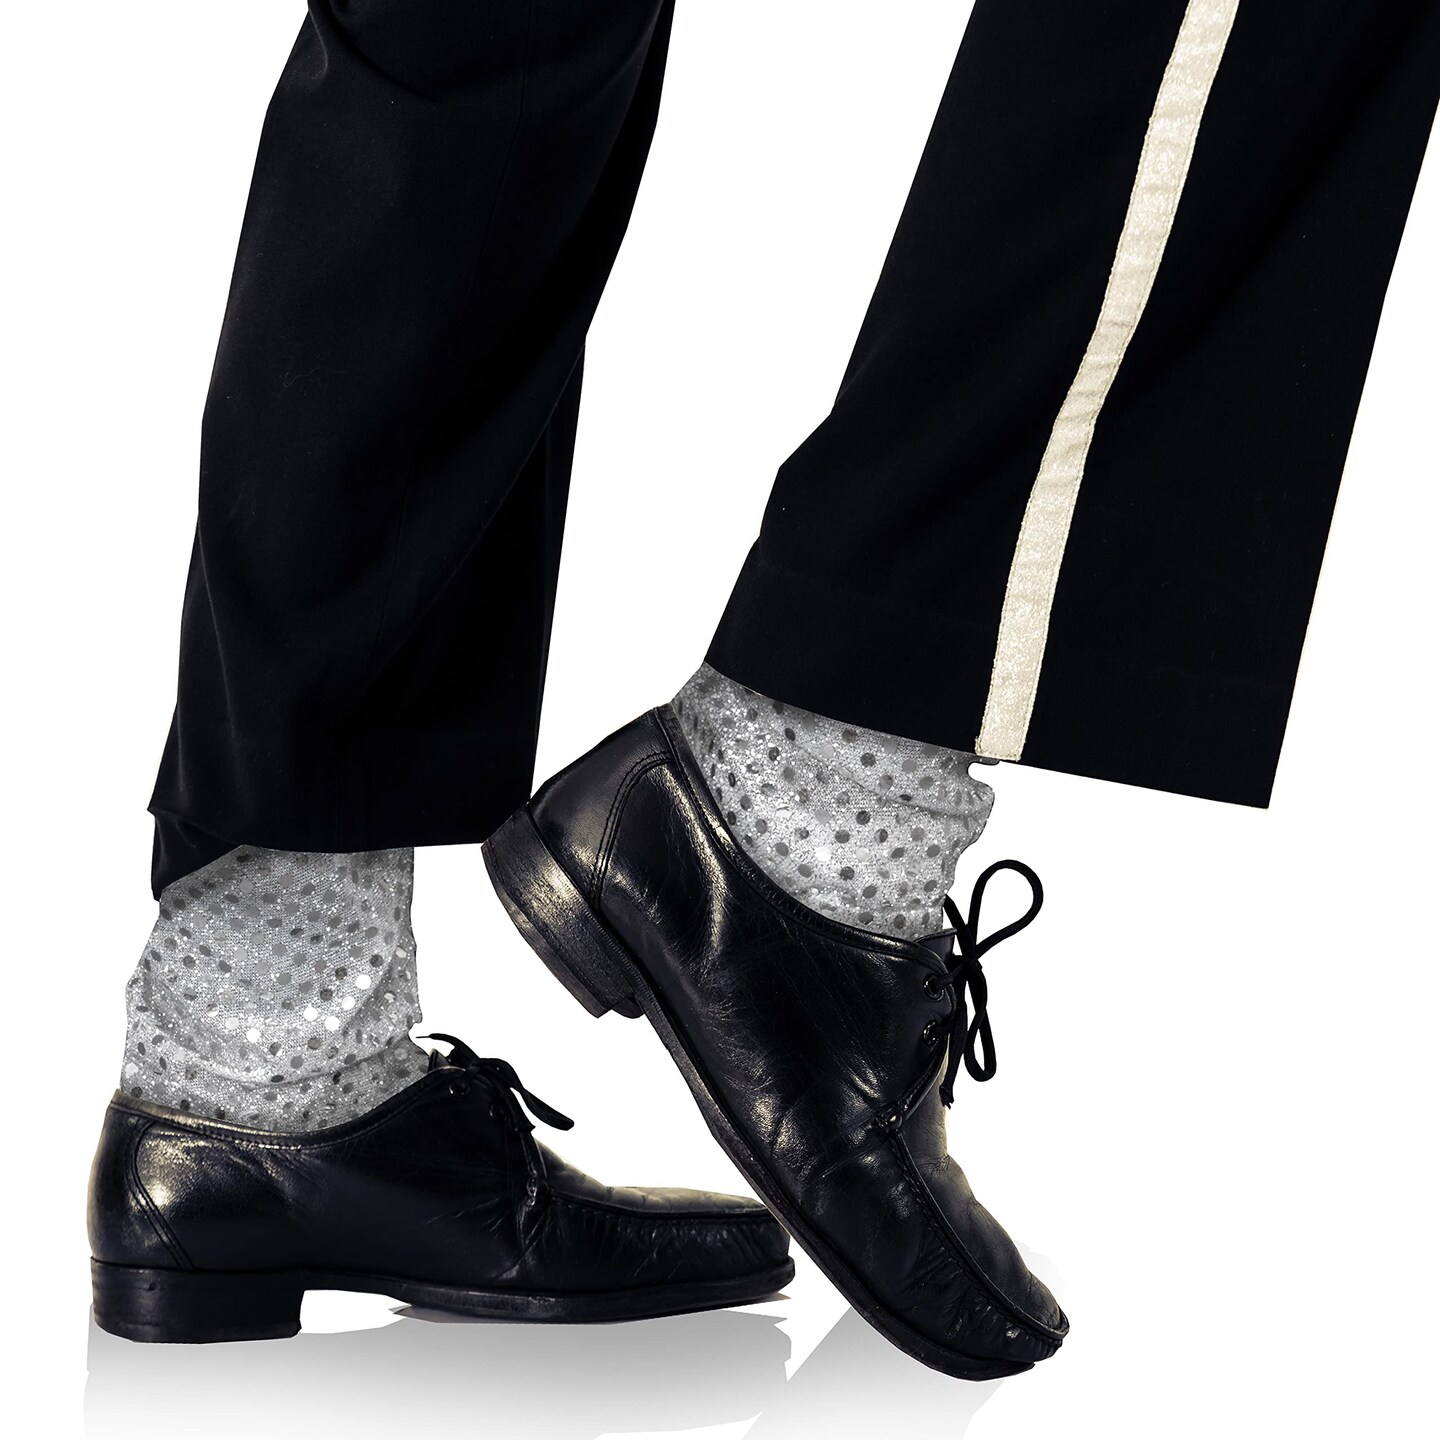  Wudlad Silver Sequin MJ Costume Glitter Socks - Michael Fake  Socks Jackson MJ Sparkle Dance Party Retro Silver Sequined Shiny Half Sock  Cover Cuffs Jackson Costumes Accessories : Clothing, Shoes 